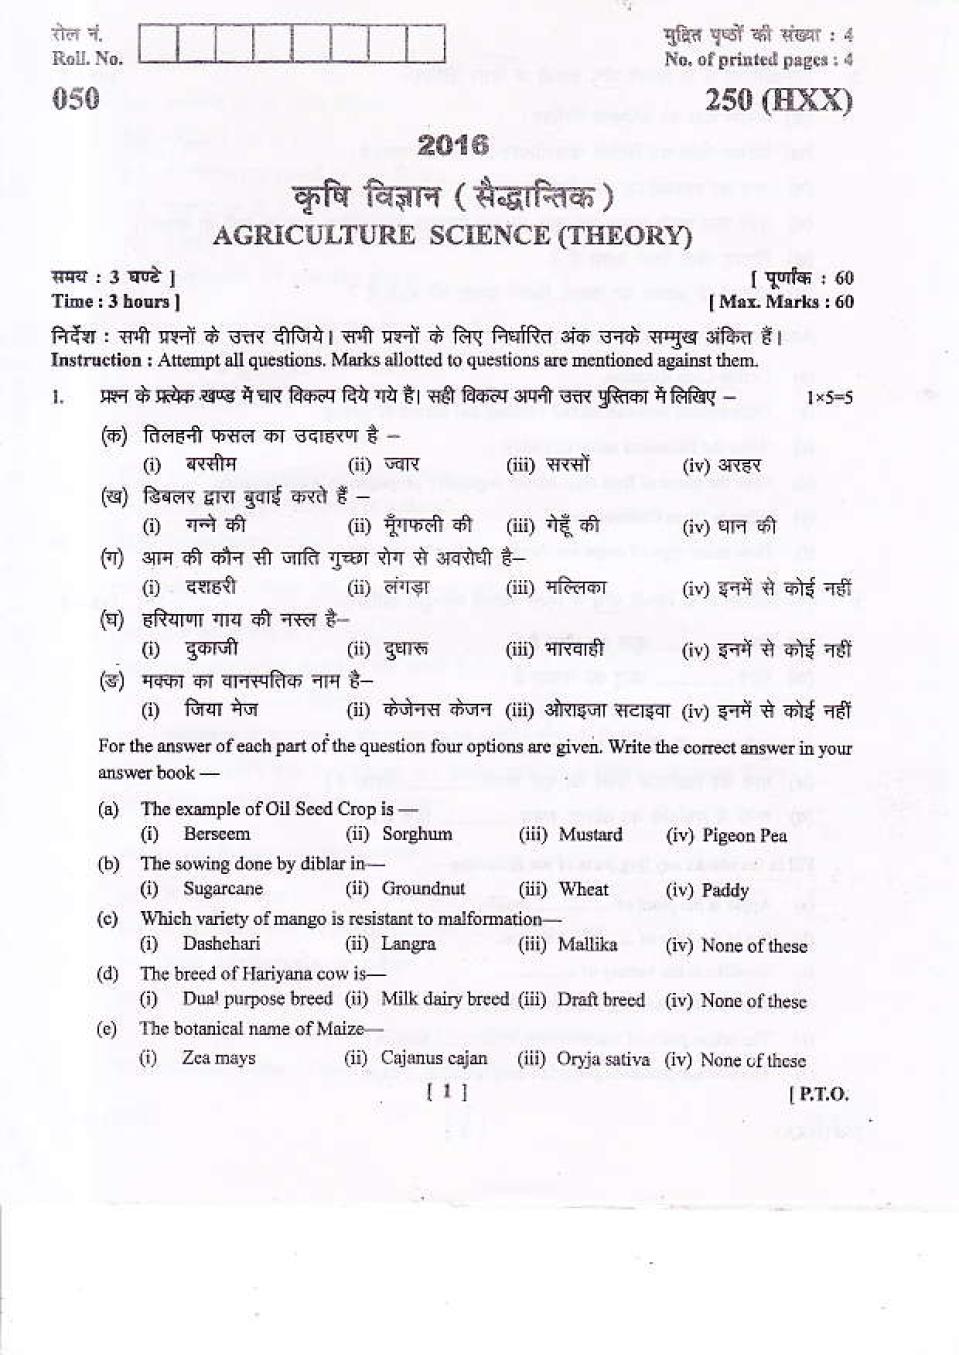 Uttarakhand Board Class 10 Question Paper 2016 for Agriculture Science - Page 1